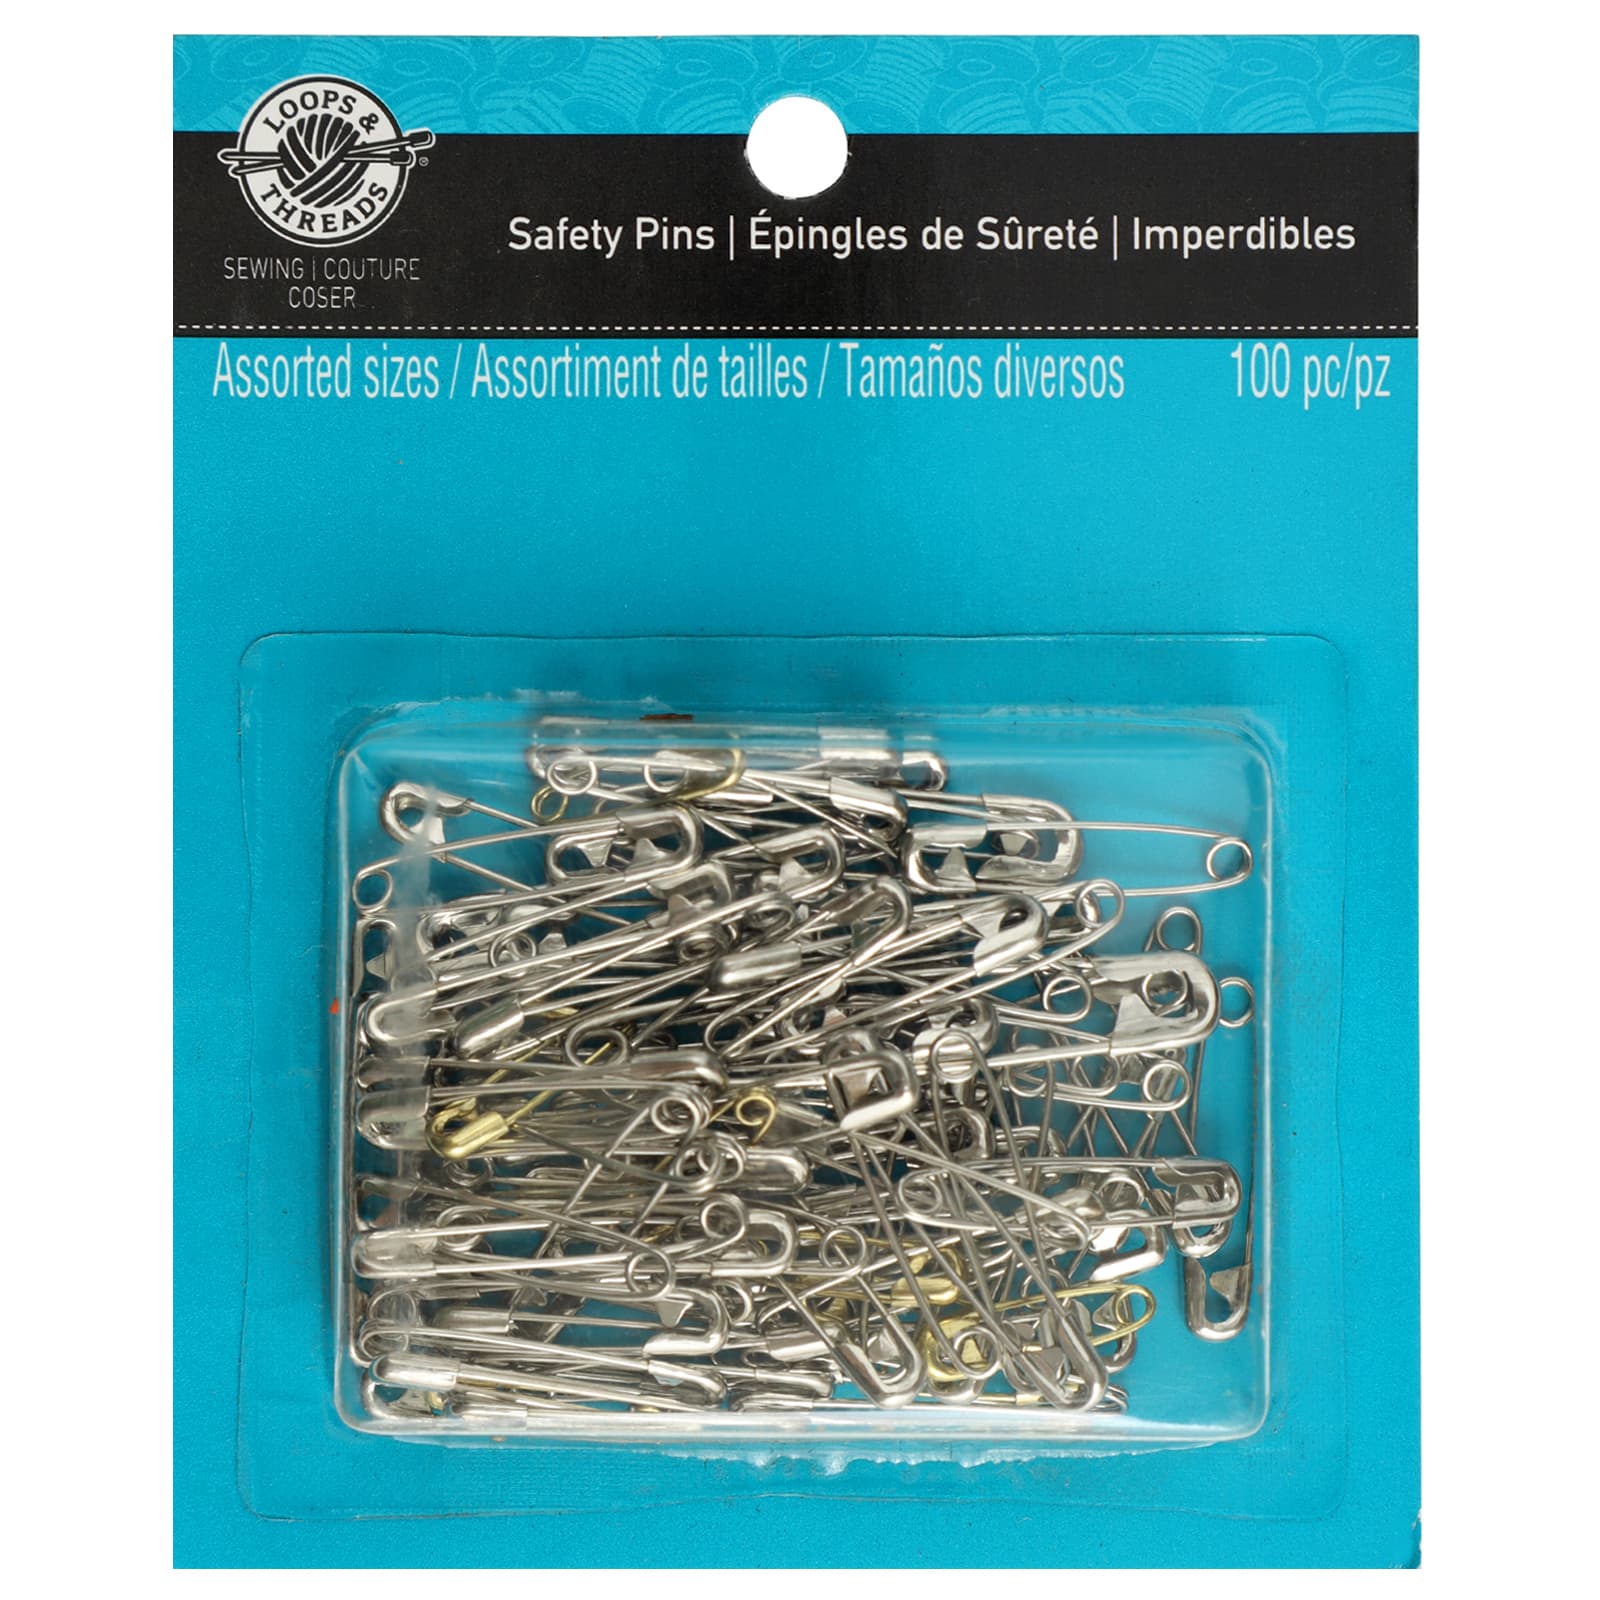 HKIDEE Standard Multi-Size Safety Pins, 460-Pack